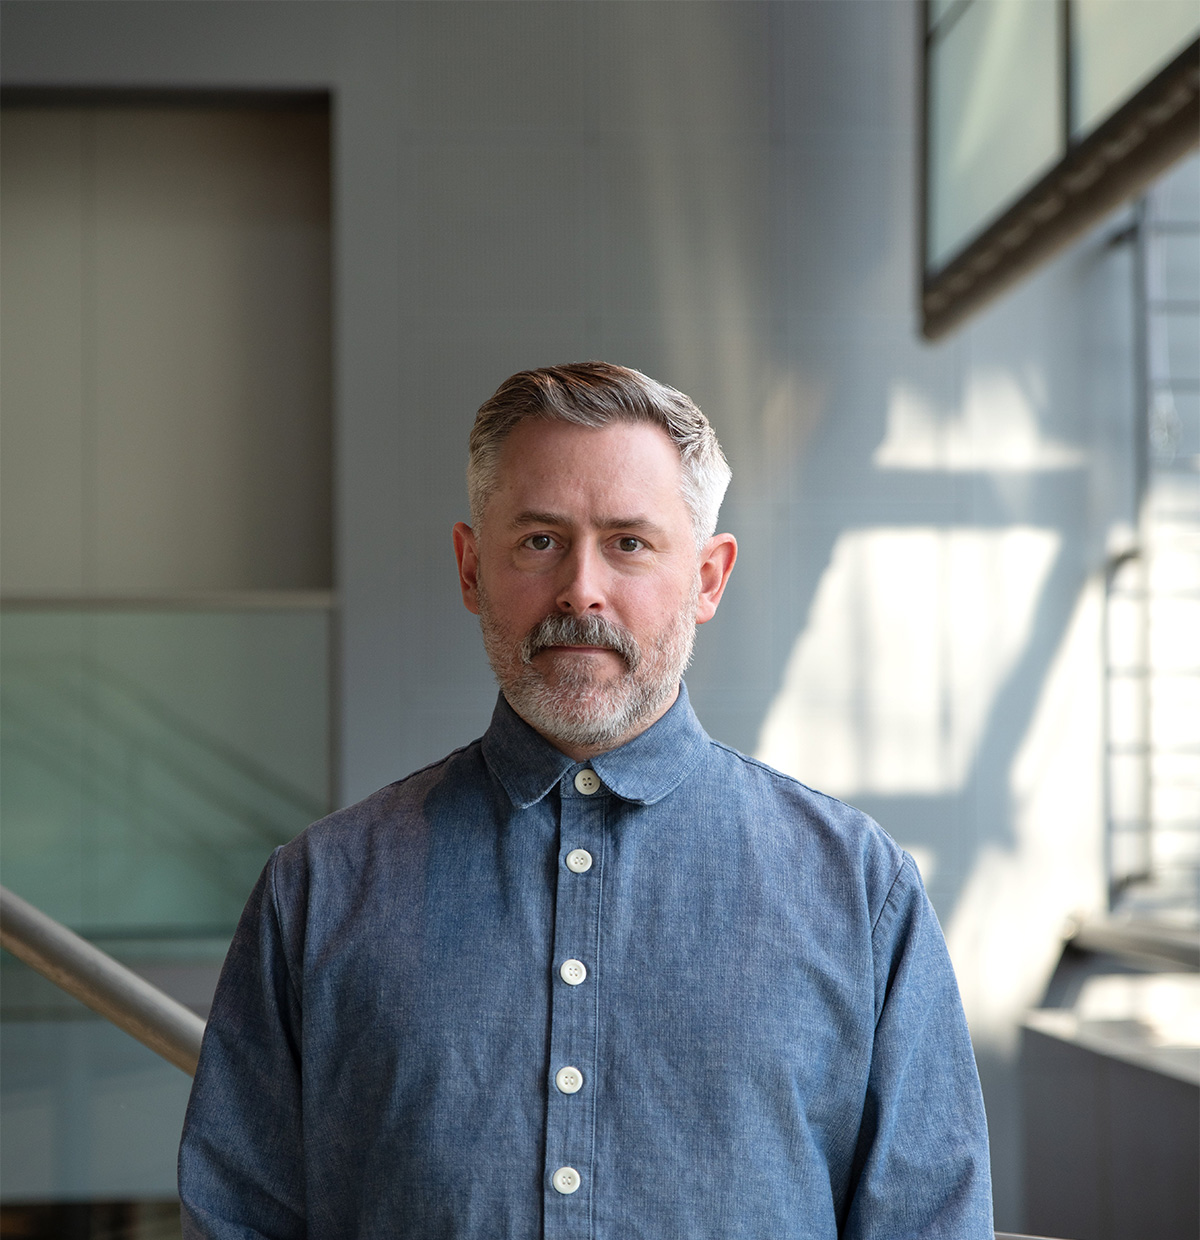 Portrait photo of Martin Hargreaves. A White man with short grey hair and beard wearing a blue button up shirt stadning in a grey room with light coming in from an unseen window